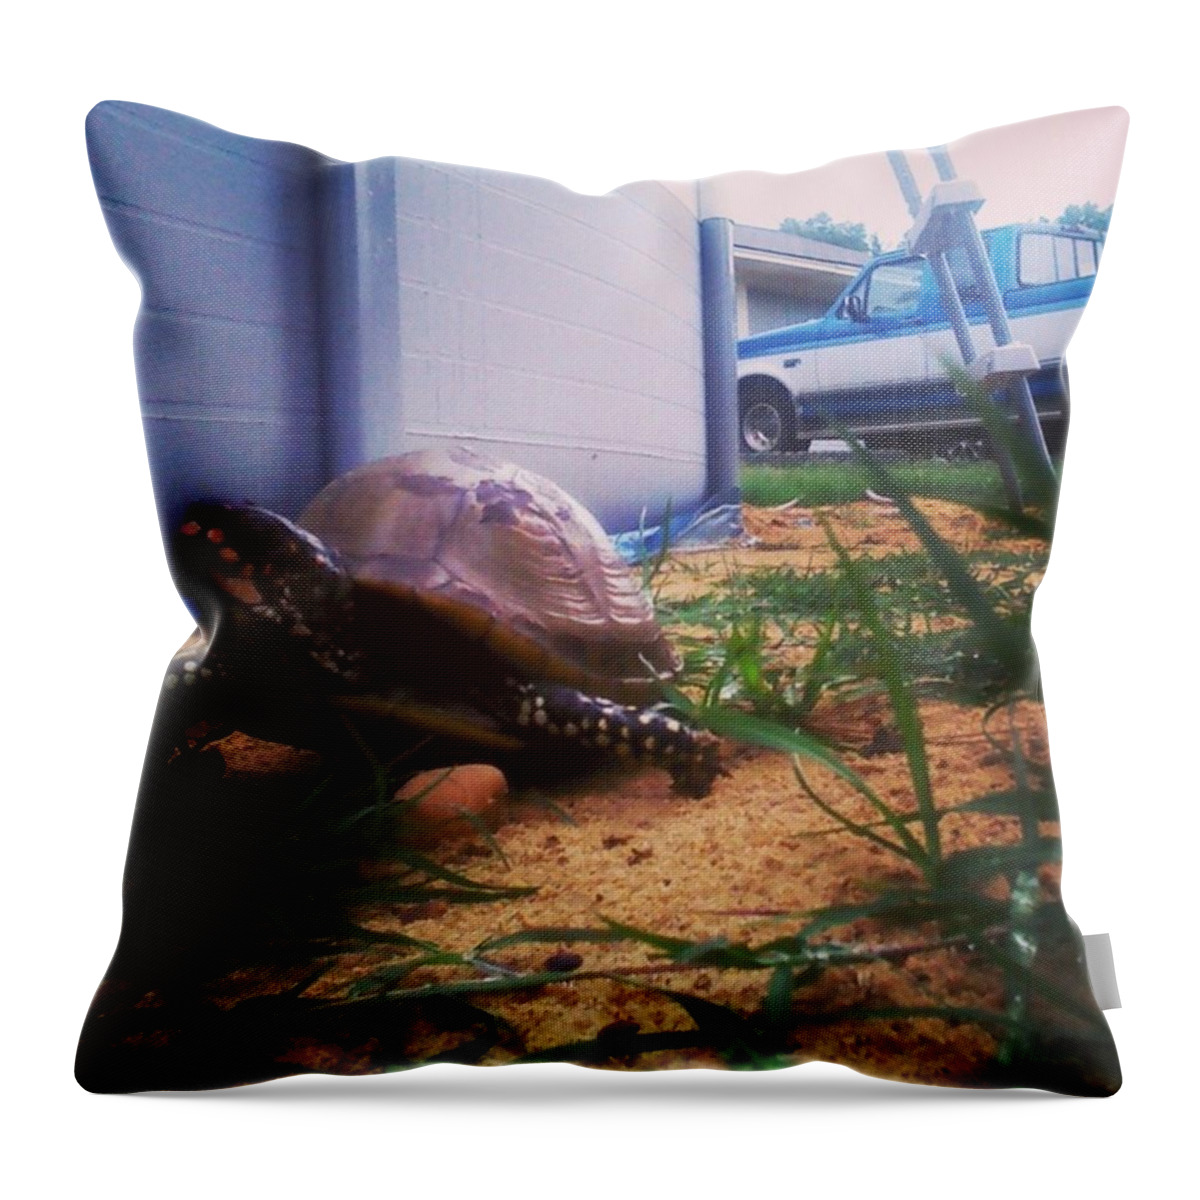 Turtle Throw Pillow featuring the photograph Run away by Haley Marie Theoboldt